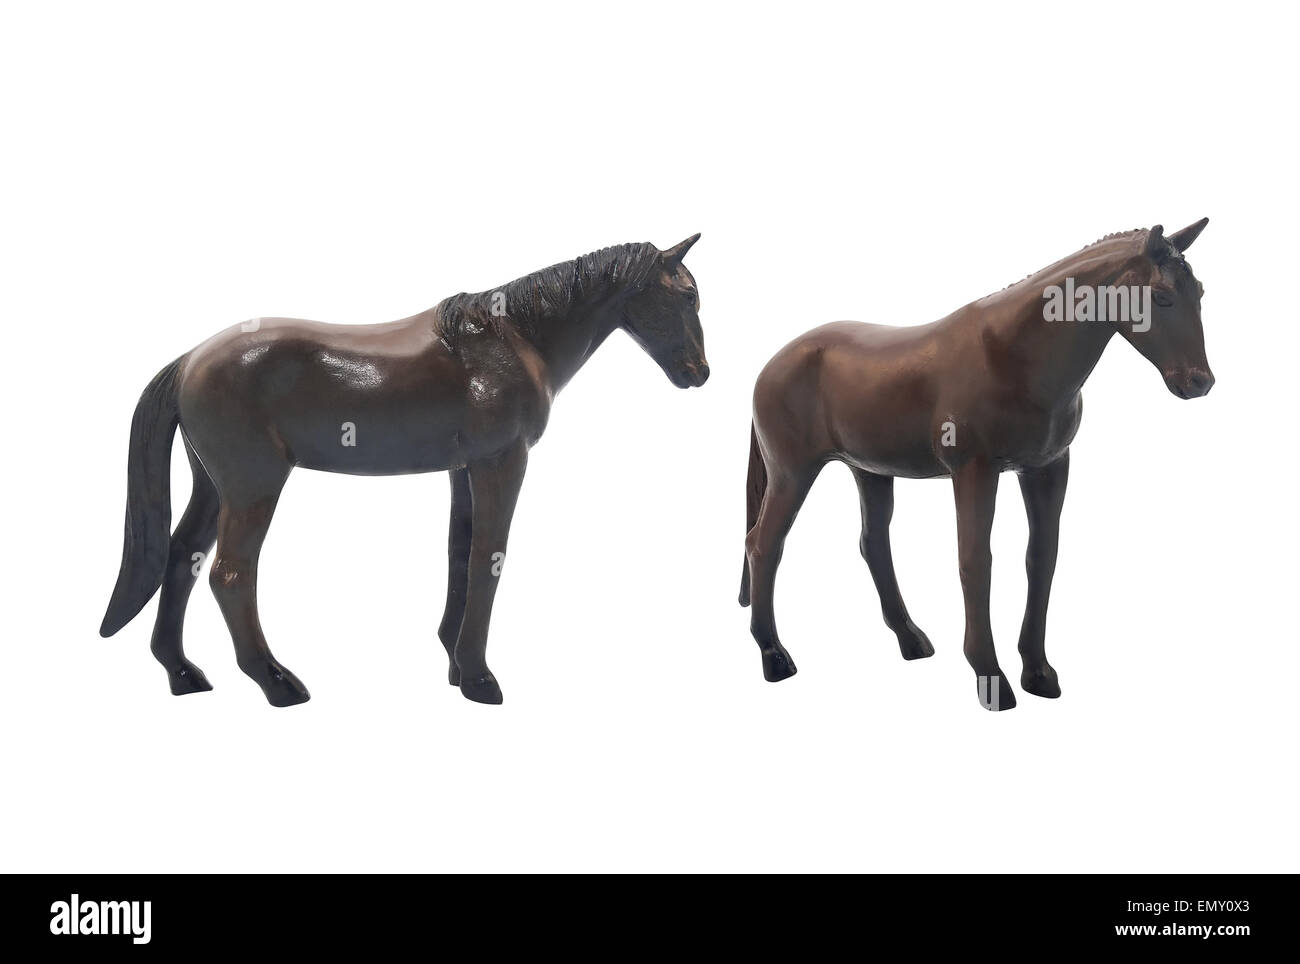 Isolated dark brown horse toy standing on white background profile and angle view. Stock Photo